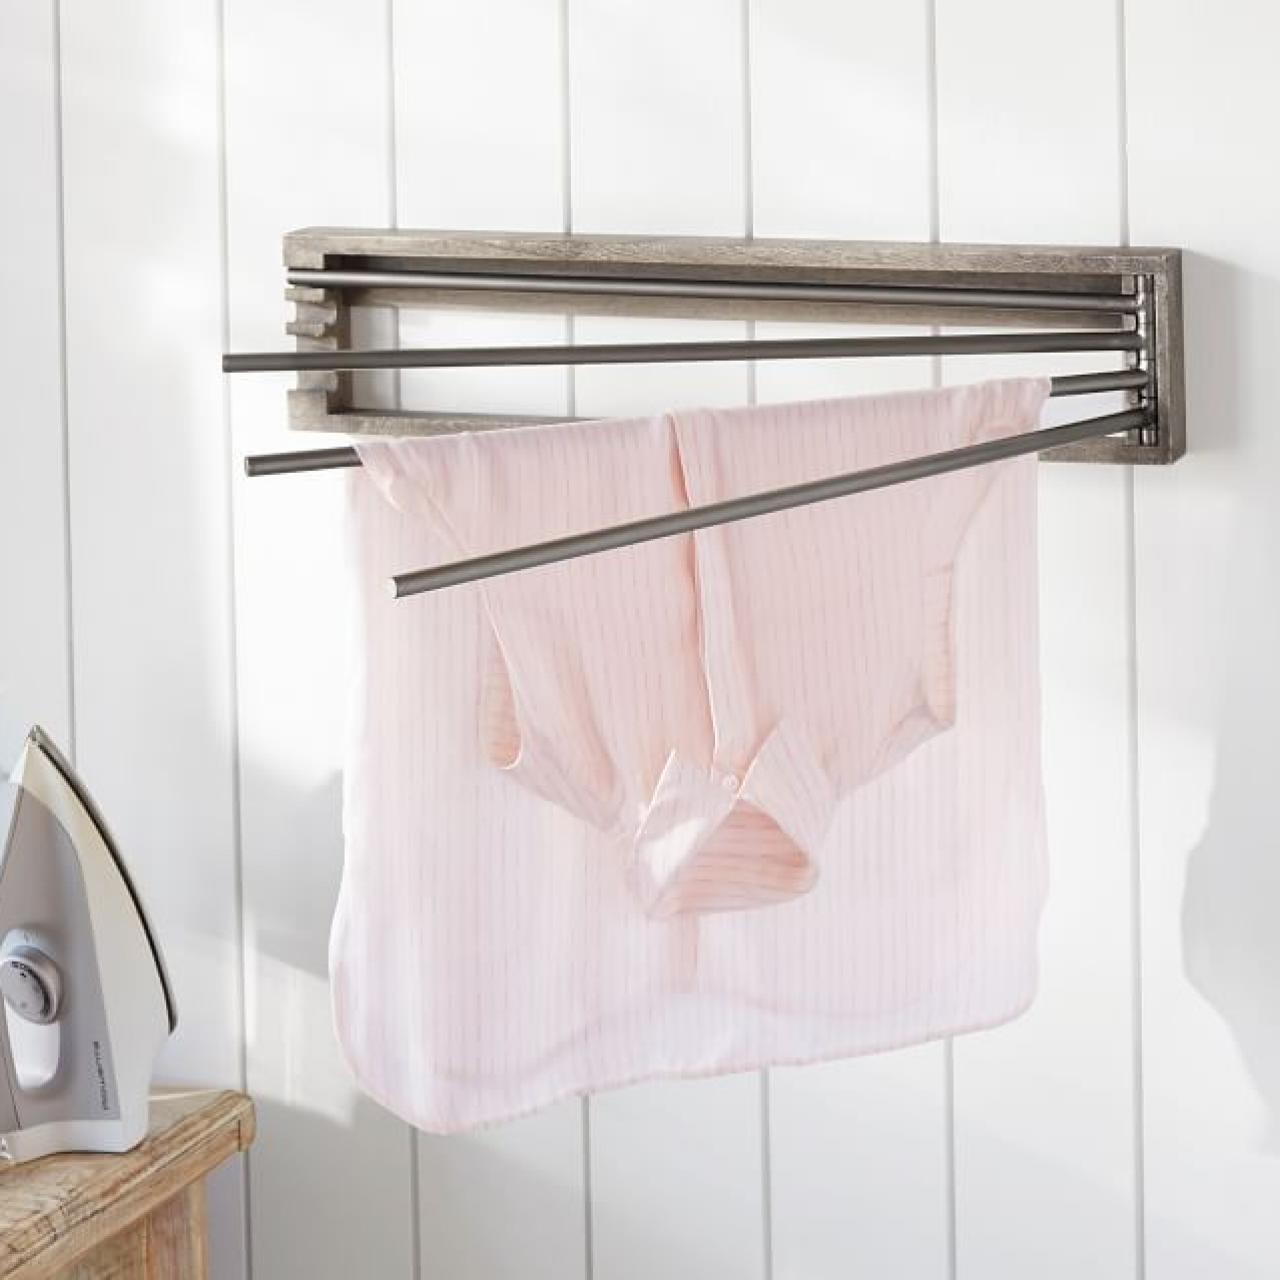 https://hgtvhome.sndimg.com/content/dam/images/hgtv/products/2022/2/16/1/rx_pottery-barn_mission-modular-laundry-drying-rack.jpeg.rend.hgtvcom.1280.1280.suffix/1645027388517.jpeg